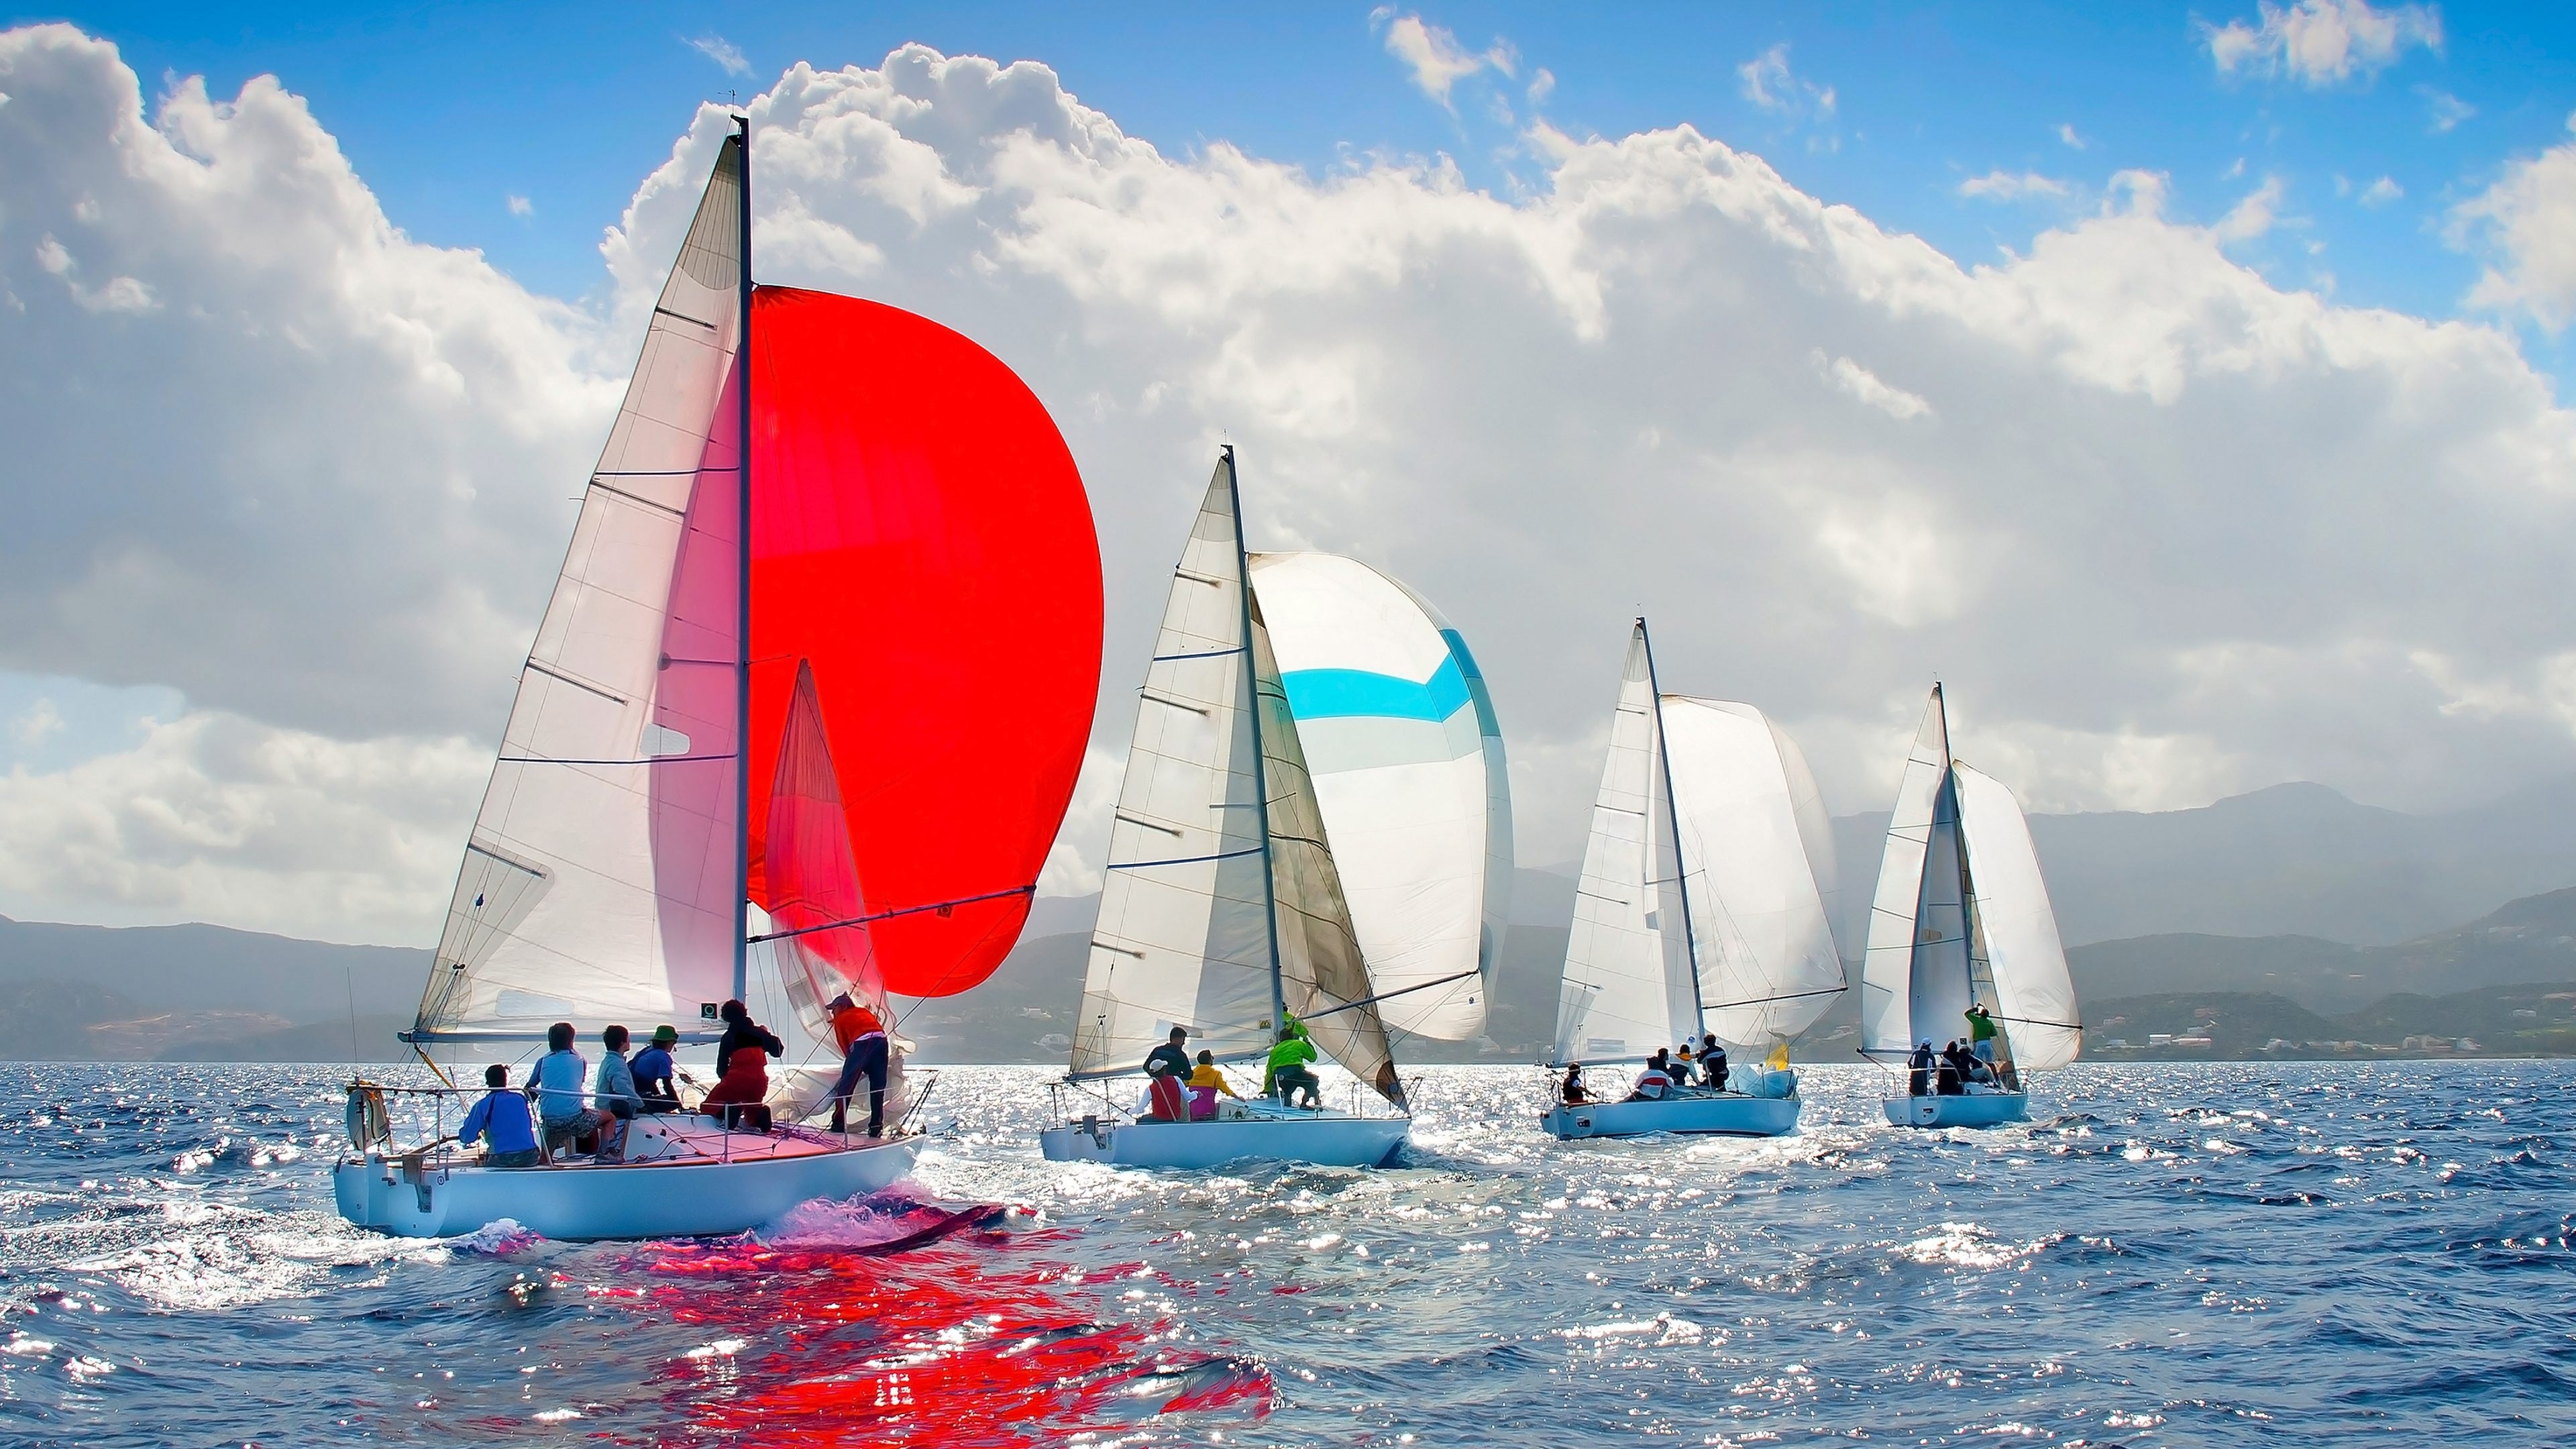 Sailing: Racing Sailboats, A sport of overcoming the distance on the water. 3840x2160 4K Background.